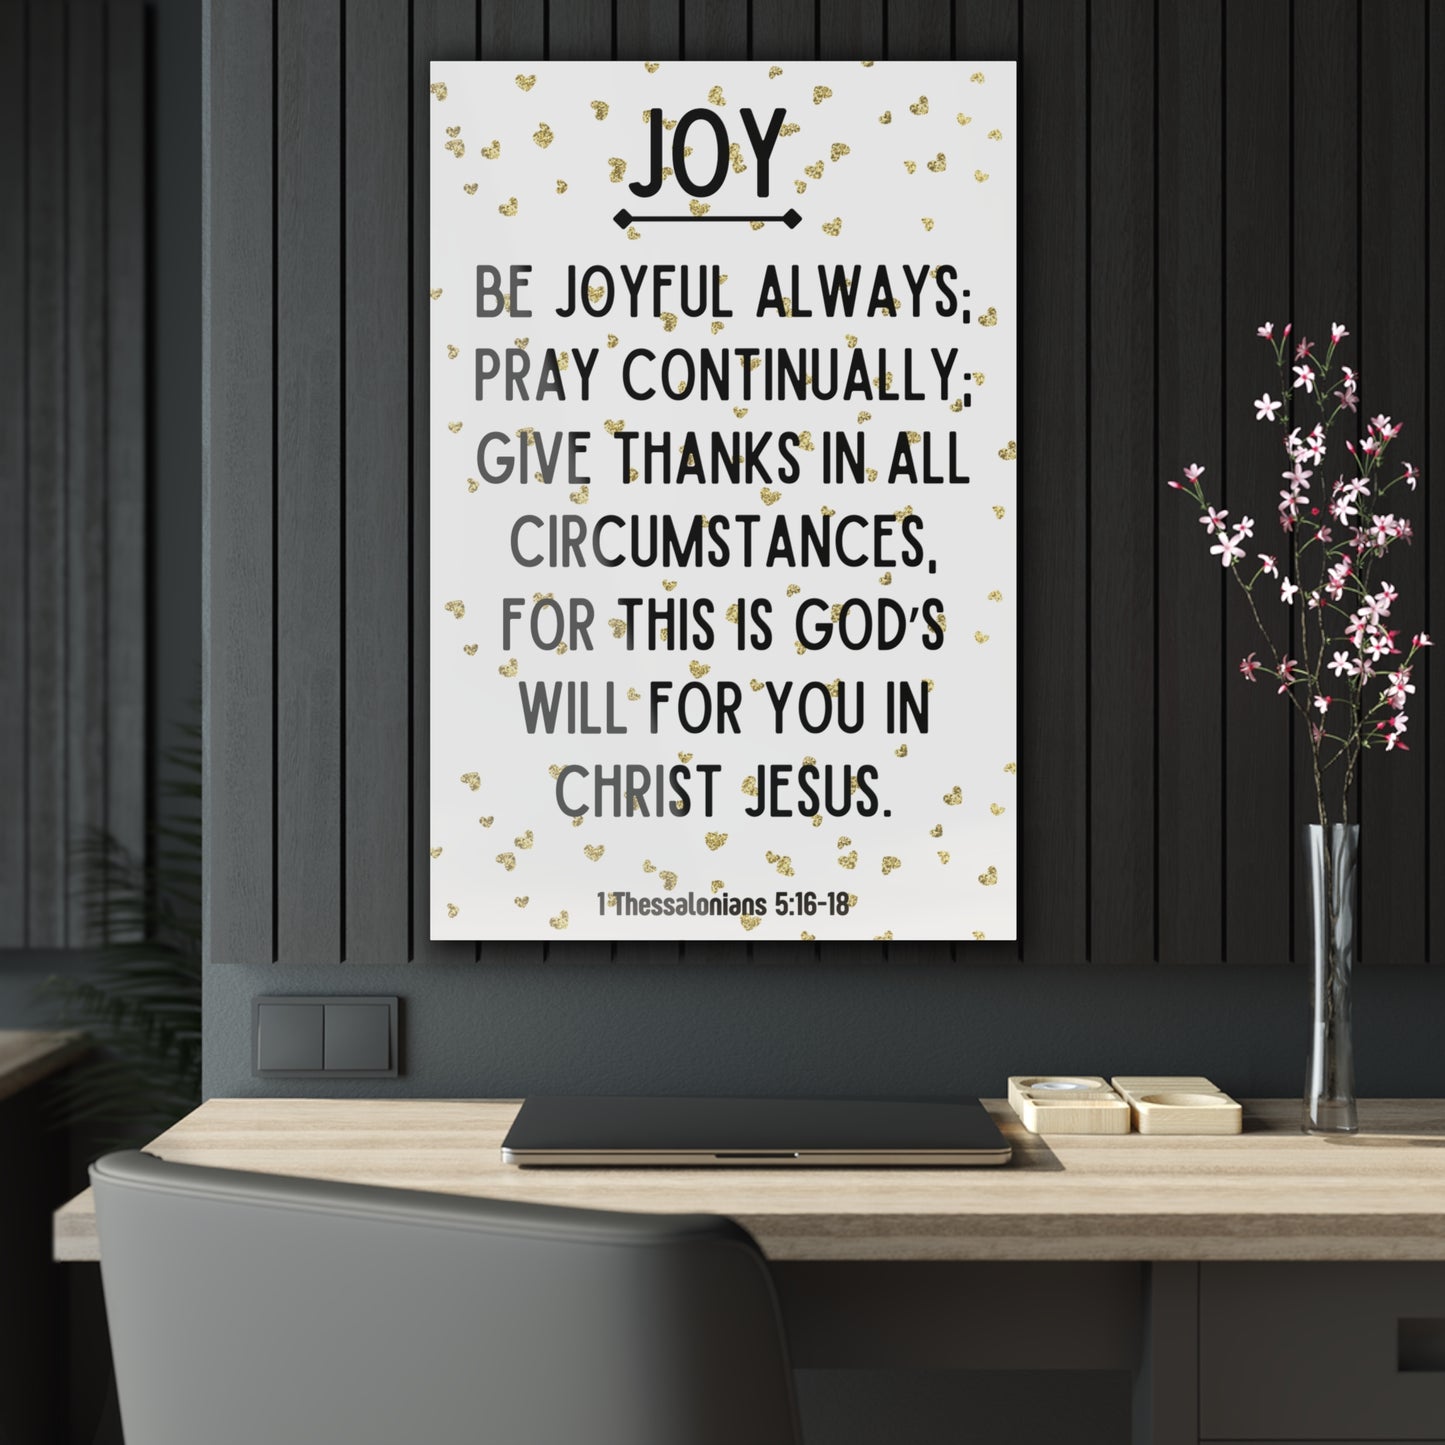 Wall Art Crystal: "Be Joyful Always" Acrylic Print | Art & Wall Decor,Assembled in the USA,Assembled in USA,Decor,Home & Living,Home Decor,Indoor,Made in the USA,Made in USA,Poster